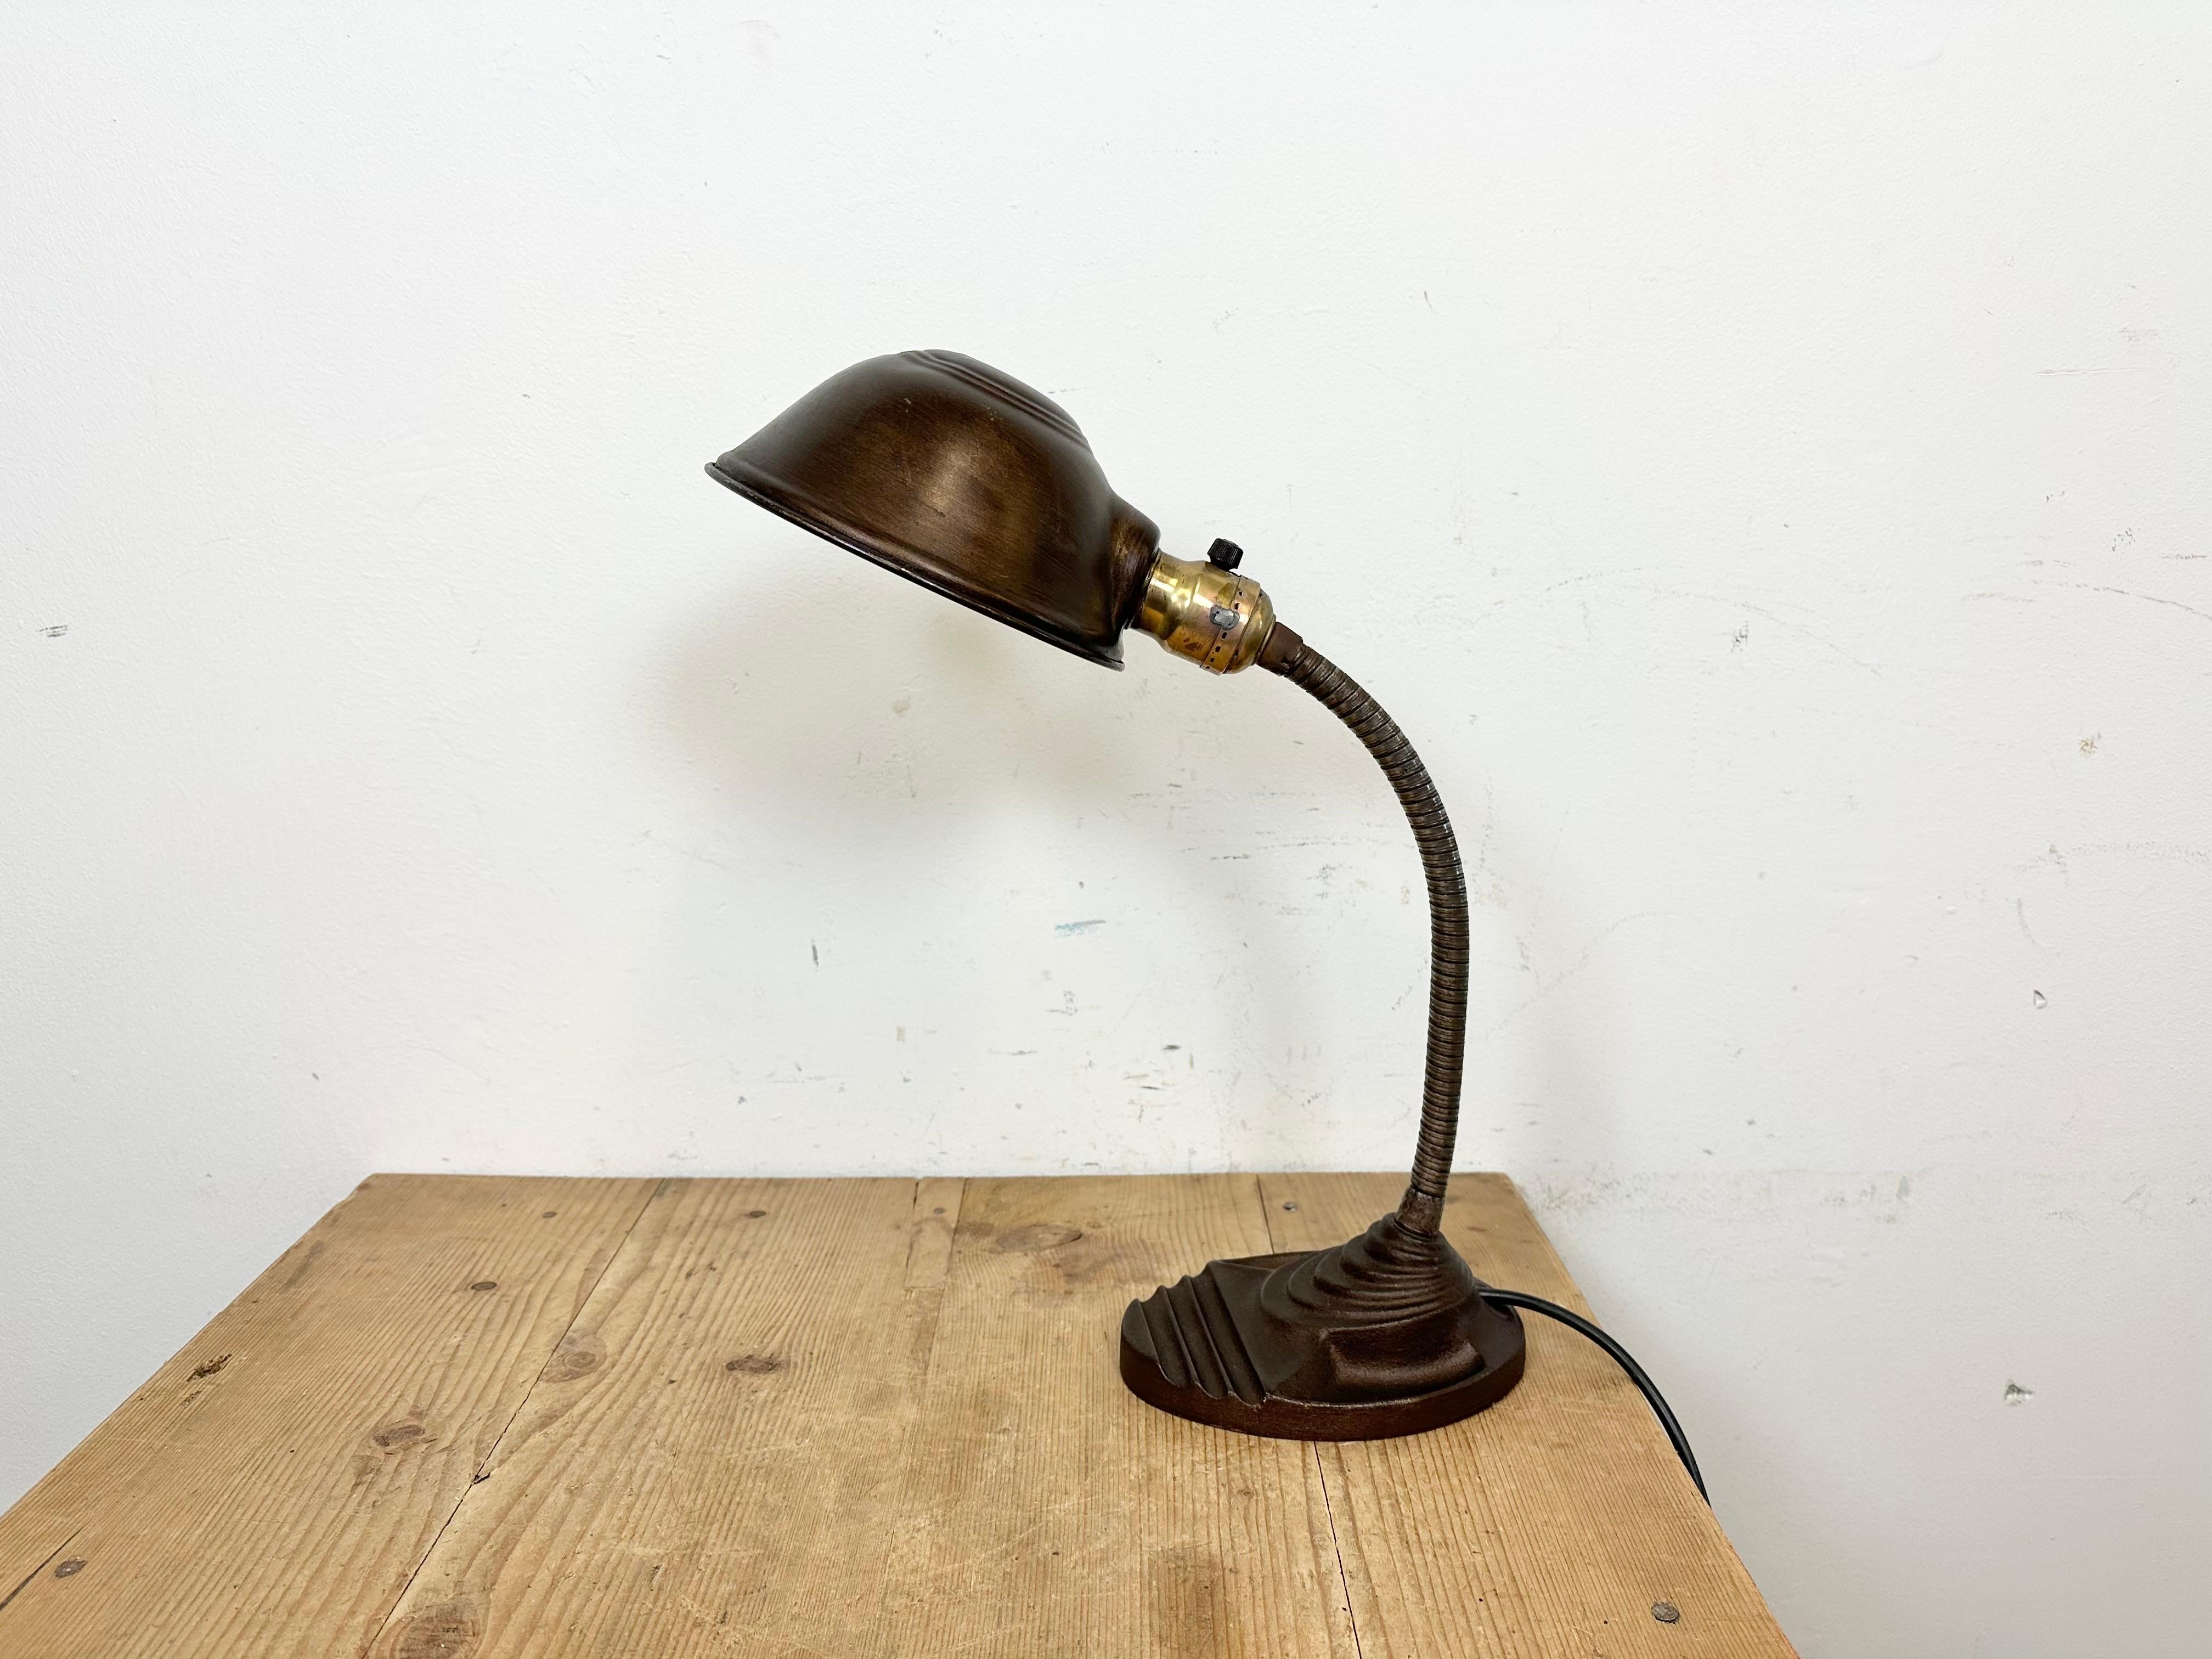 Vintage art deco flexible gooseneck table lamp  made by Eagle in United States during the 1930s. It features a cast iron base, an iron gooseneck and a metal shade.The socket requires  standard E 27/E 26 light bulbs. New wire The lampshade diameter